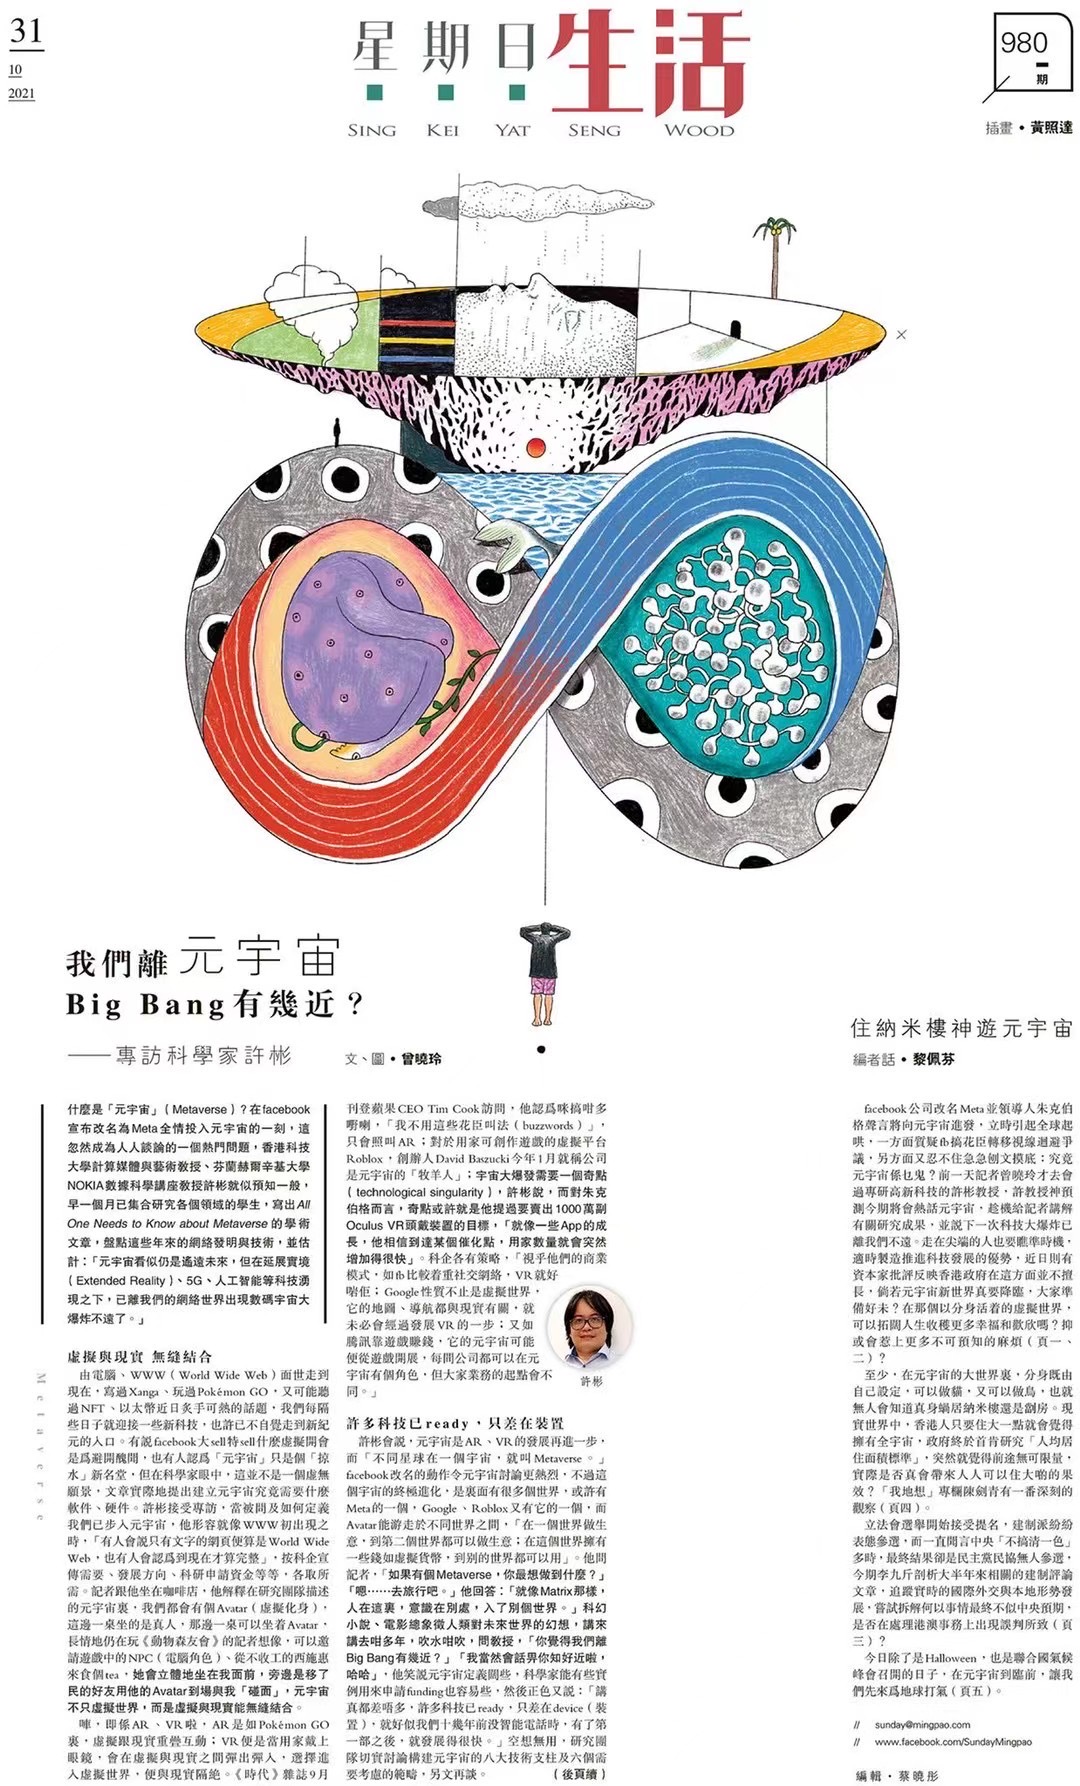 Professor Pan Hui's Metaverse Research Featured on Ming Pao (News in Chinese)